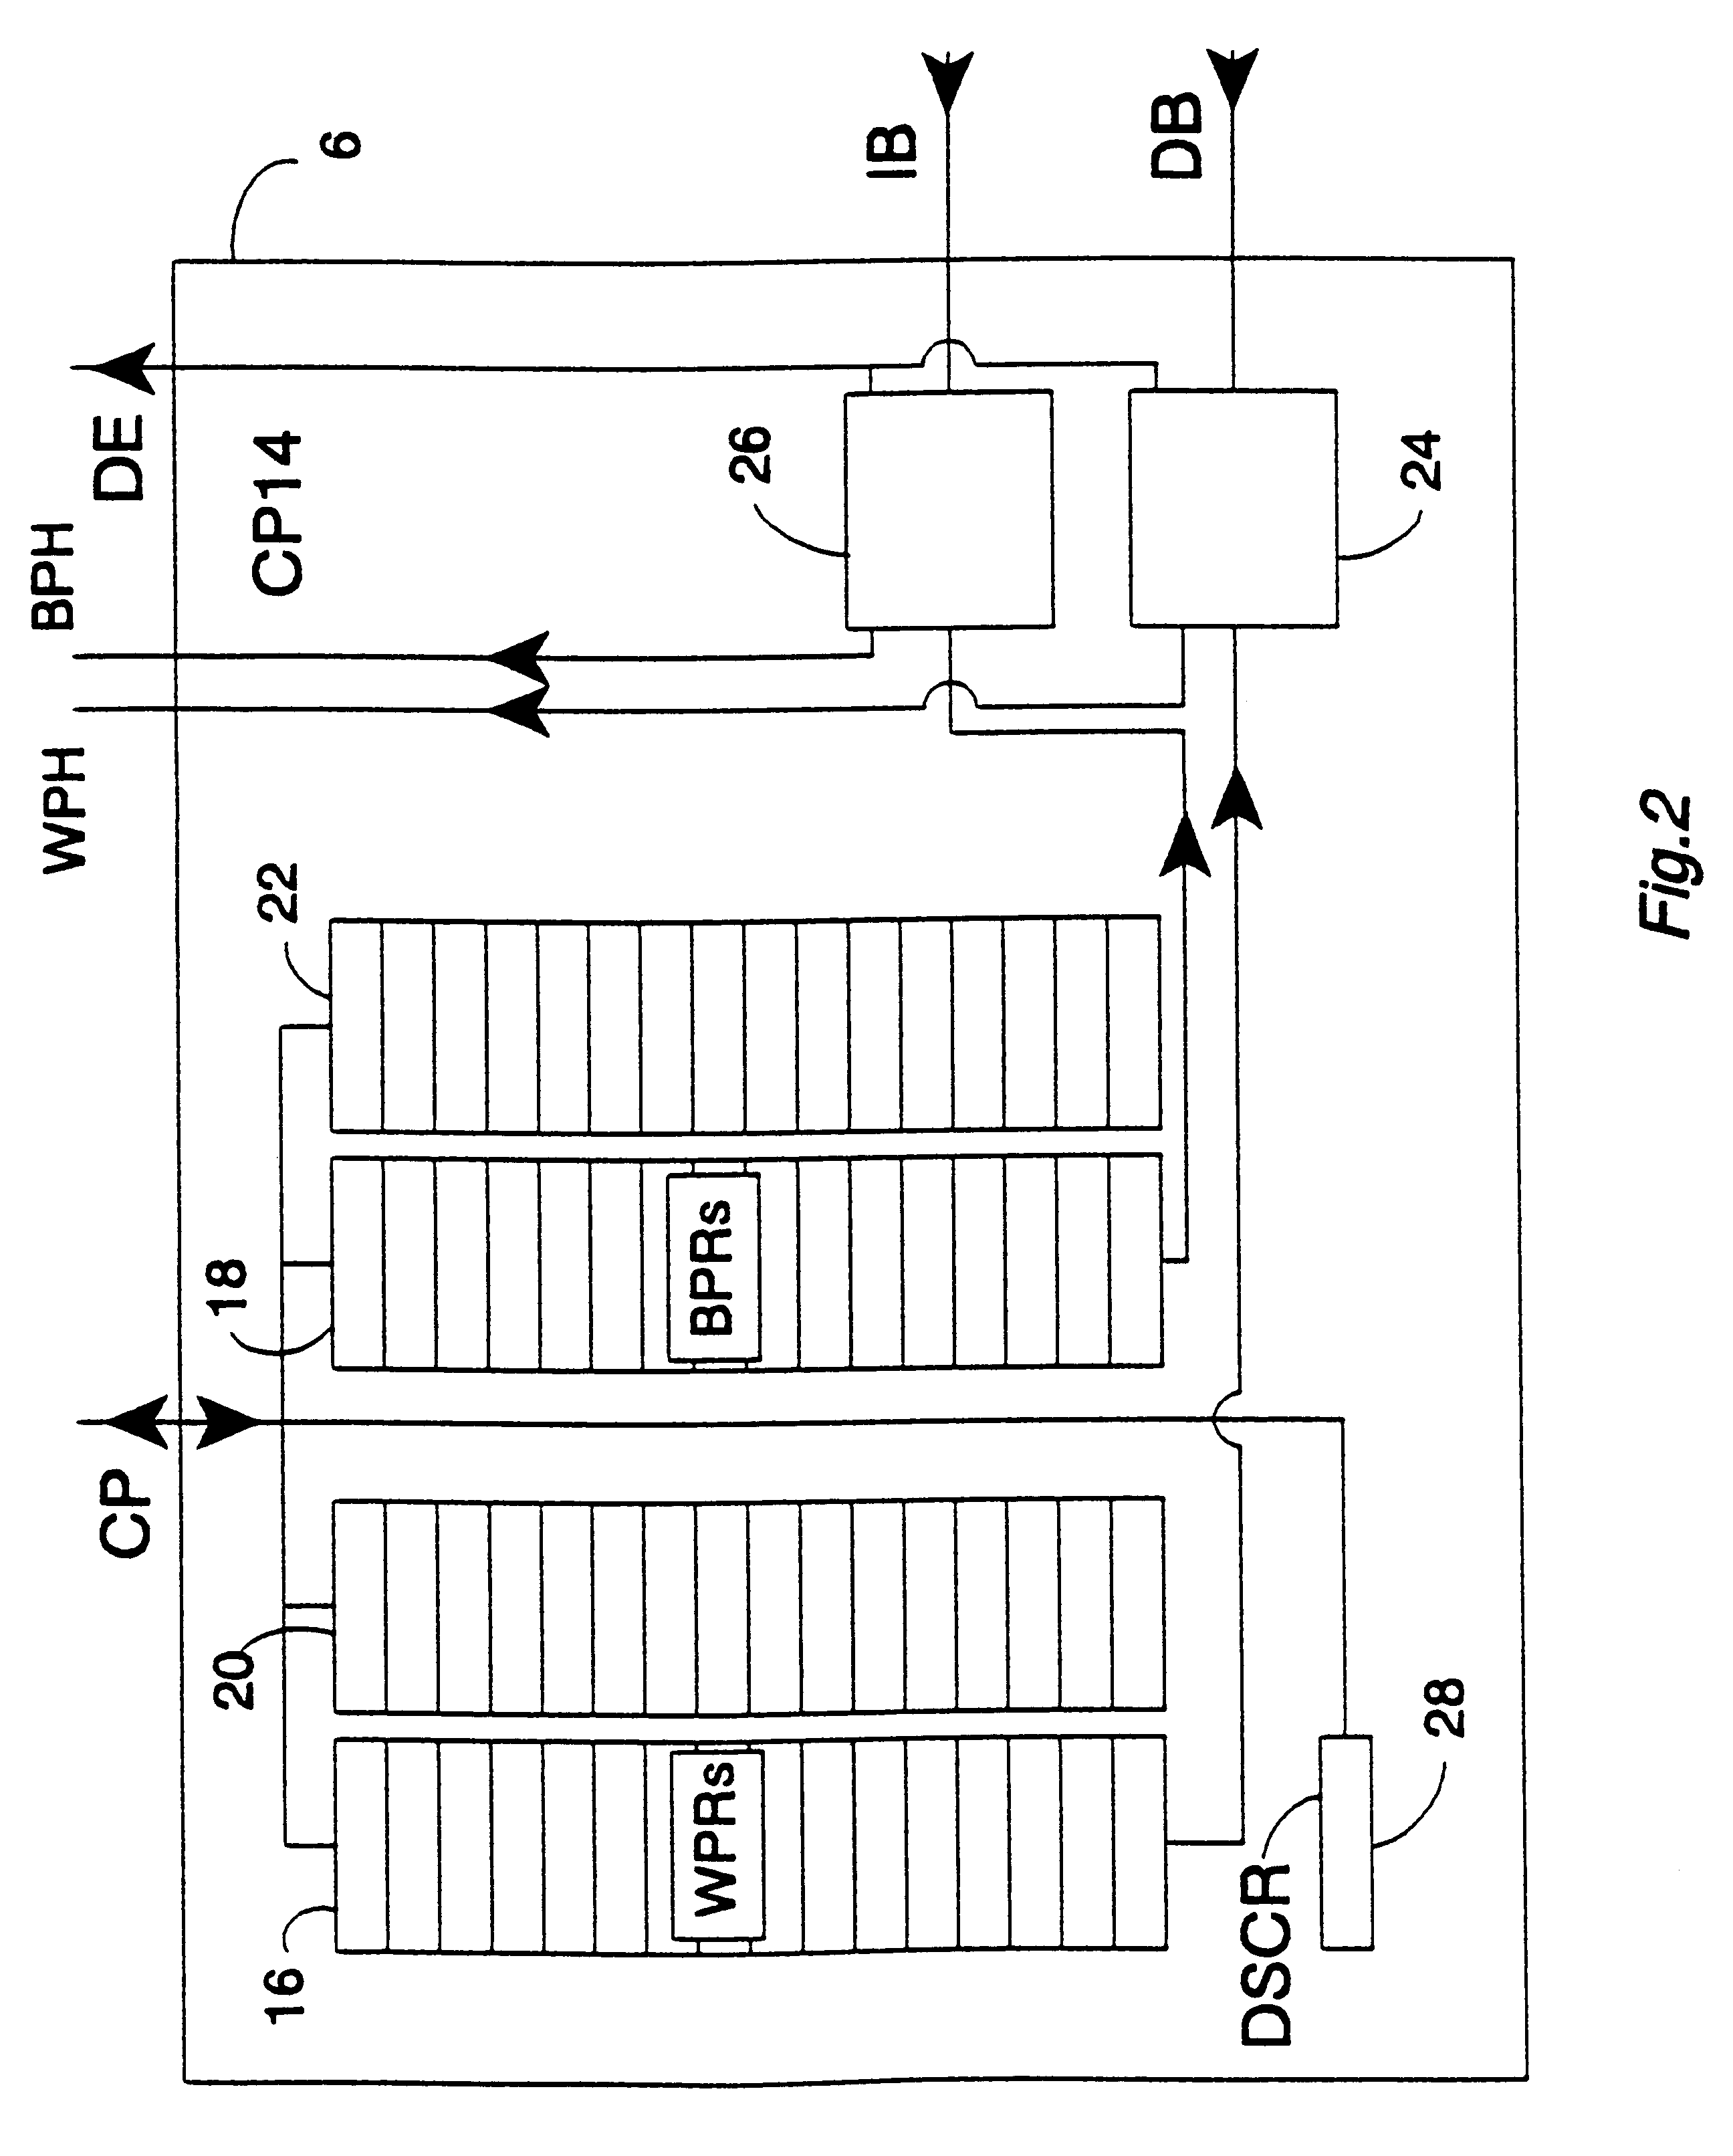 Debug mechanism for data processing systems